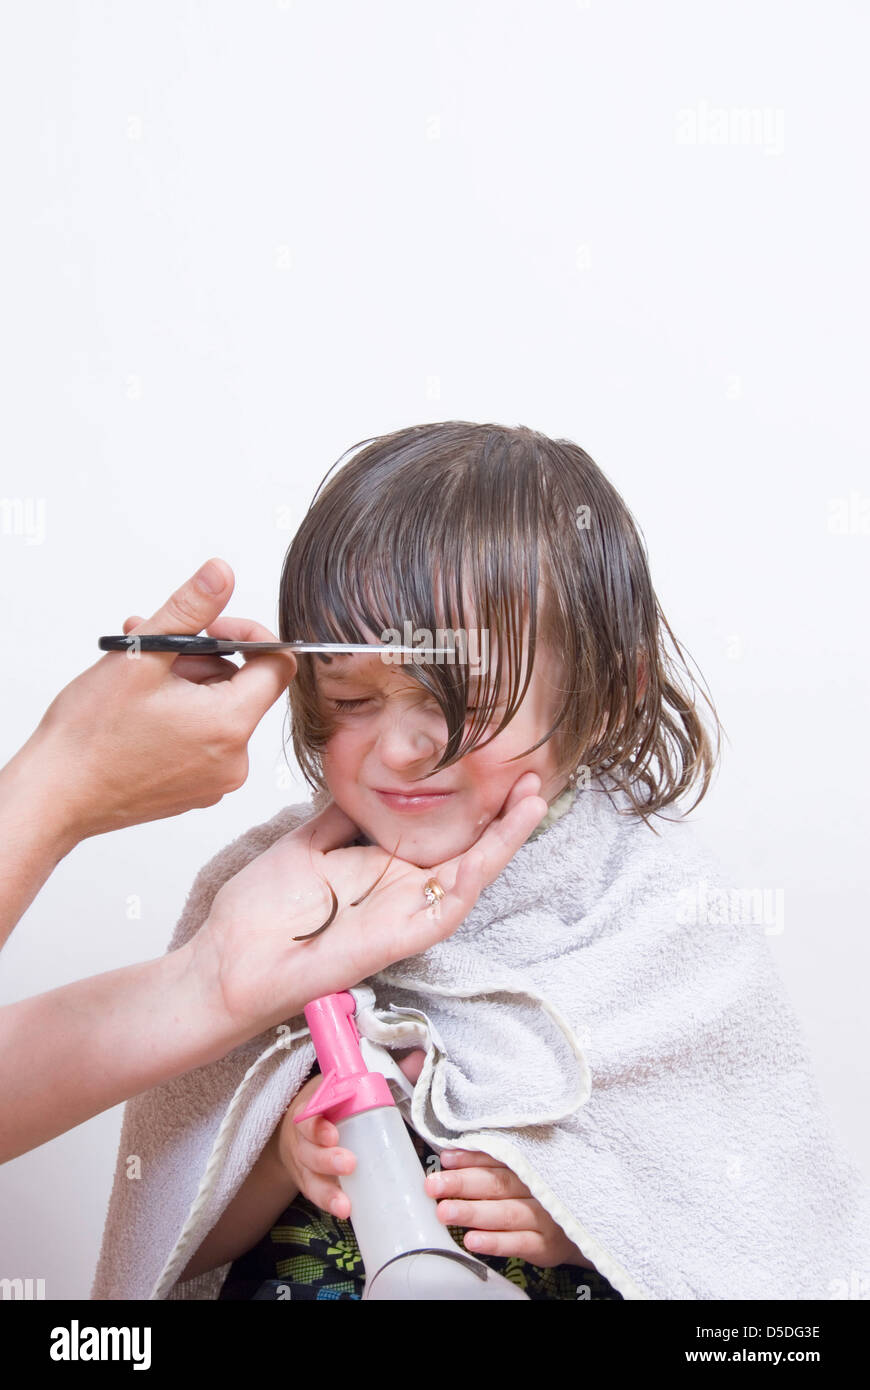 Mom Makes a Haircut for Her Two Year Old Son with Scissors in the Bathroom  at Home Stock Image - Image of casual, scissors: 182291571